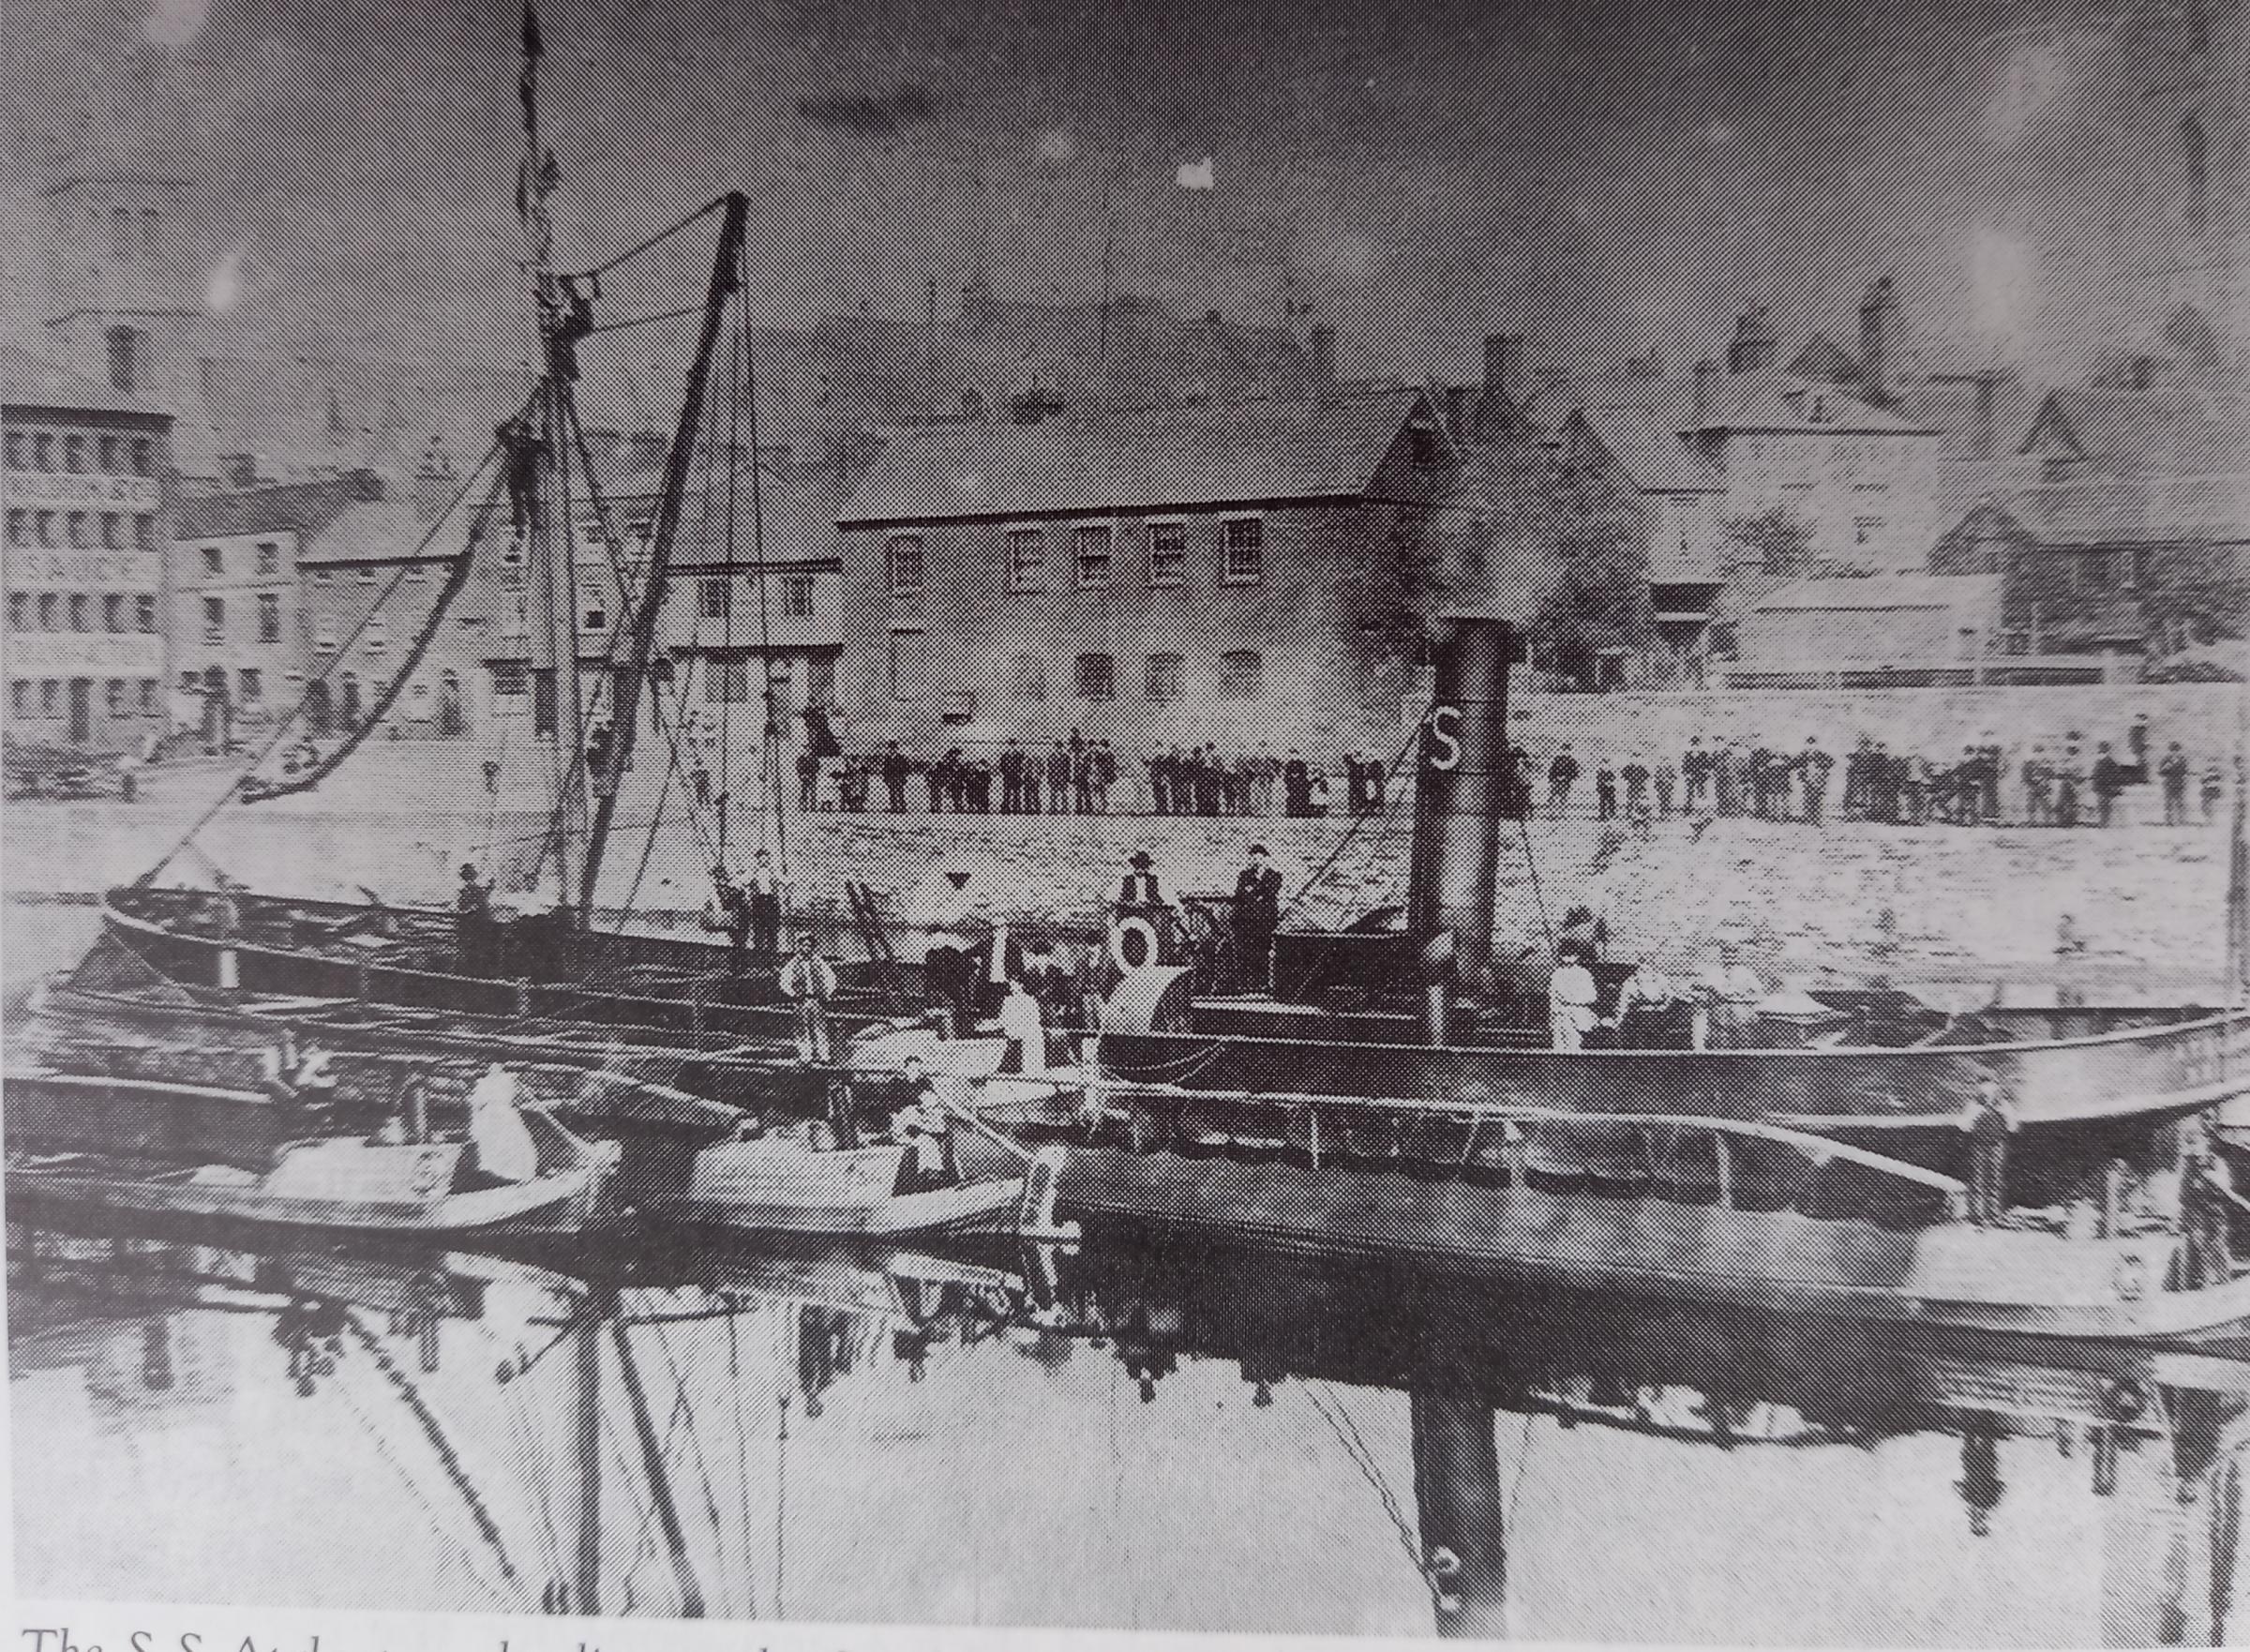 The SS Atlanta unloading on South Quay, Worcester in 1900, the last vessel to dock directly from the coast